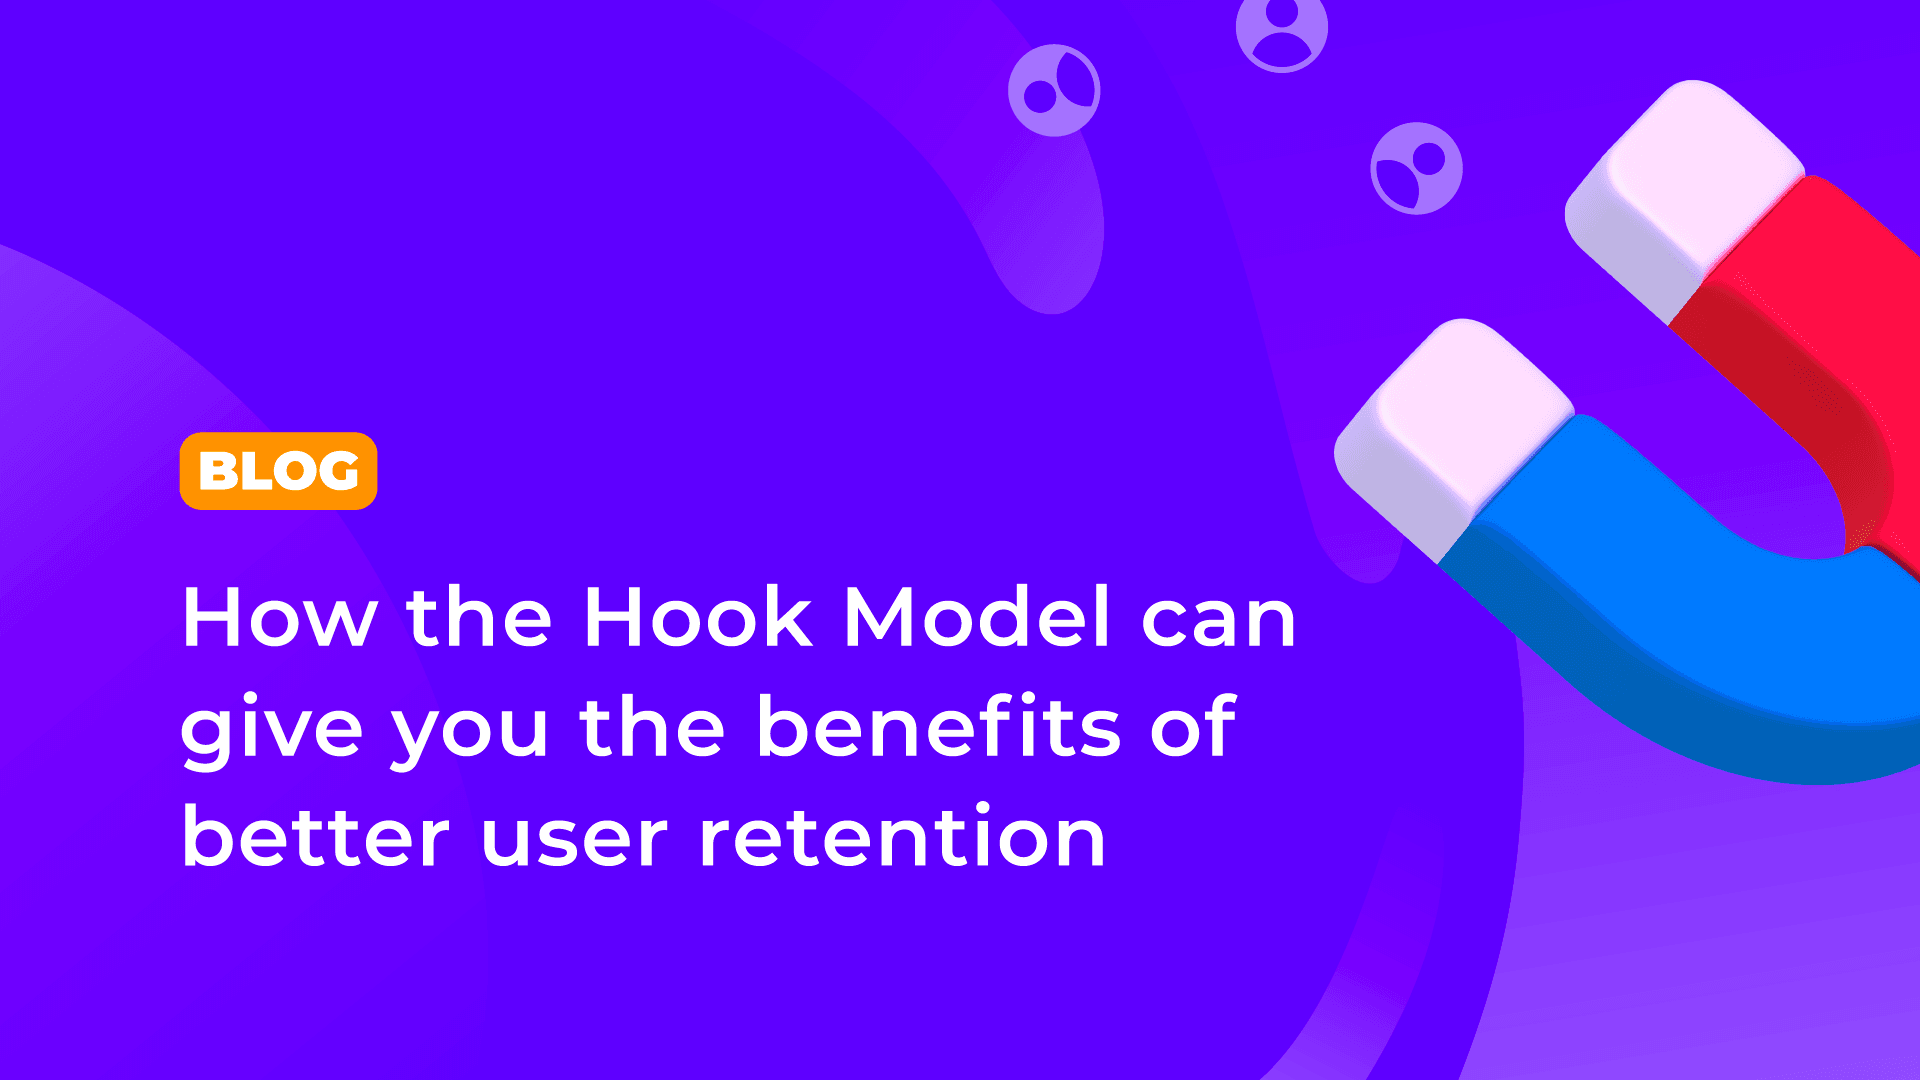 How the Hook Model can give you the benefits of better user retention